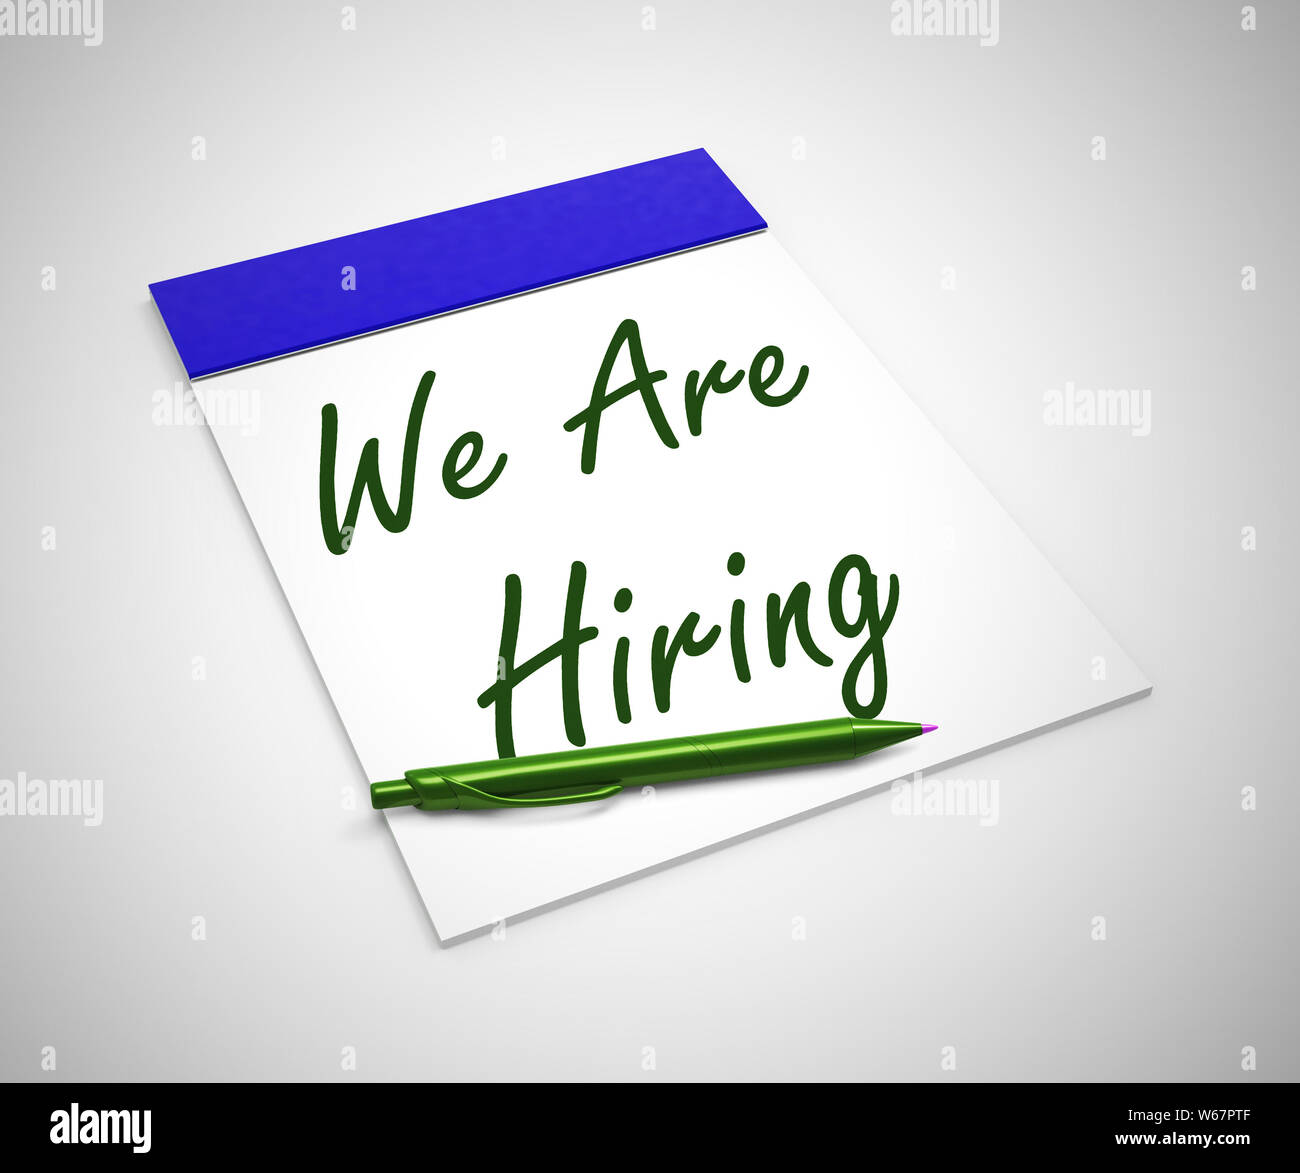 We are hiring no means jobs available. A career placement needs filling - 3d illustration Stock Photo